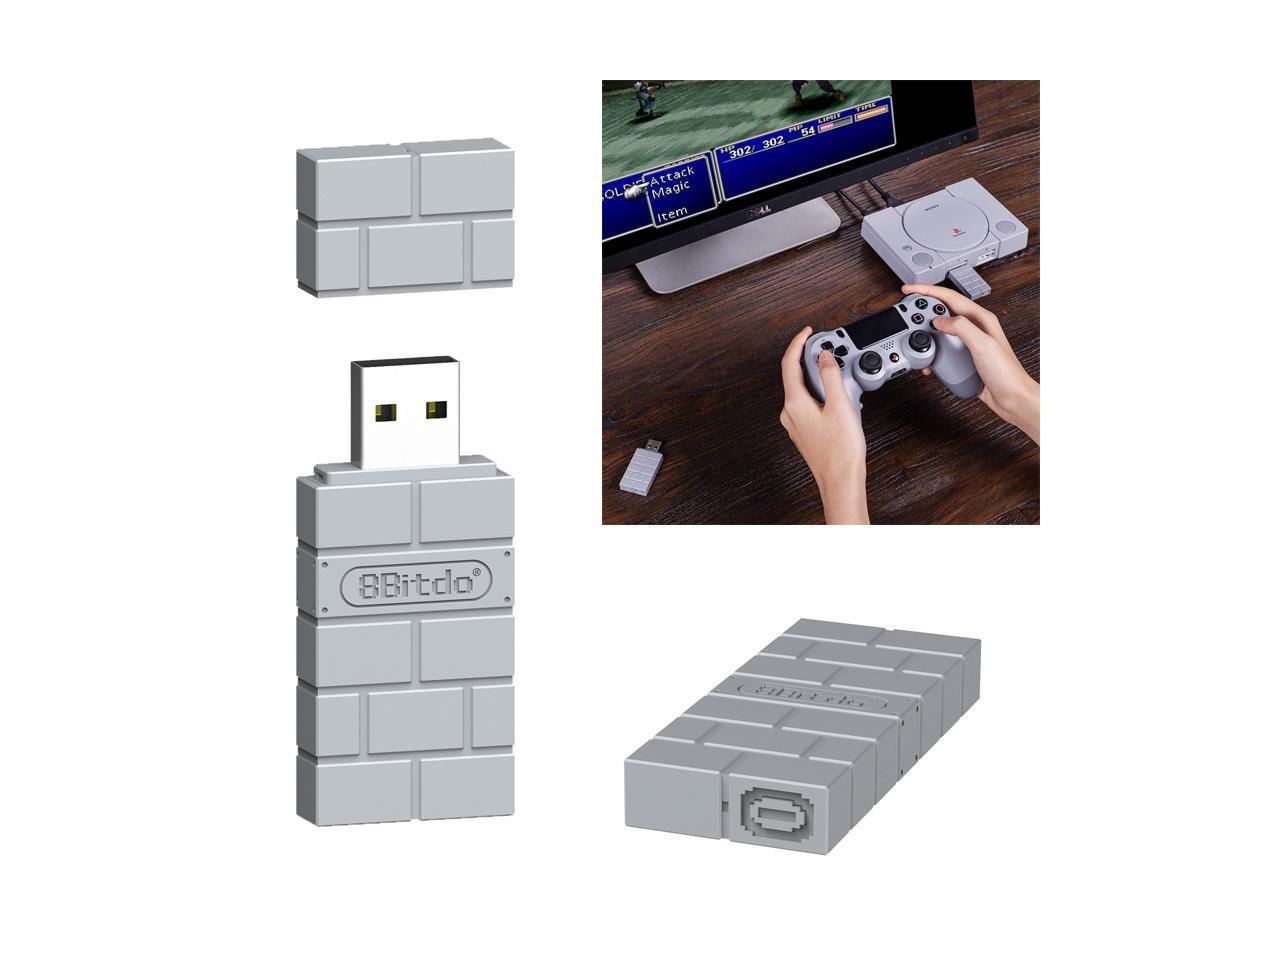 For Switch RR Adapter PC Host Game Controller Gray 8 Bitdo Wireless Bluetooth Game pad Receiver USB Converter for PS3 PS4 (1 pcs)